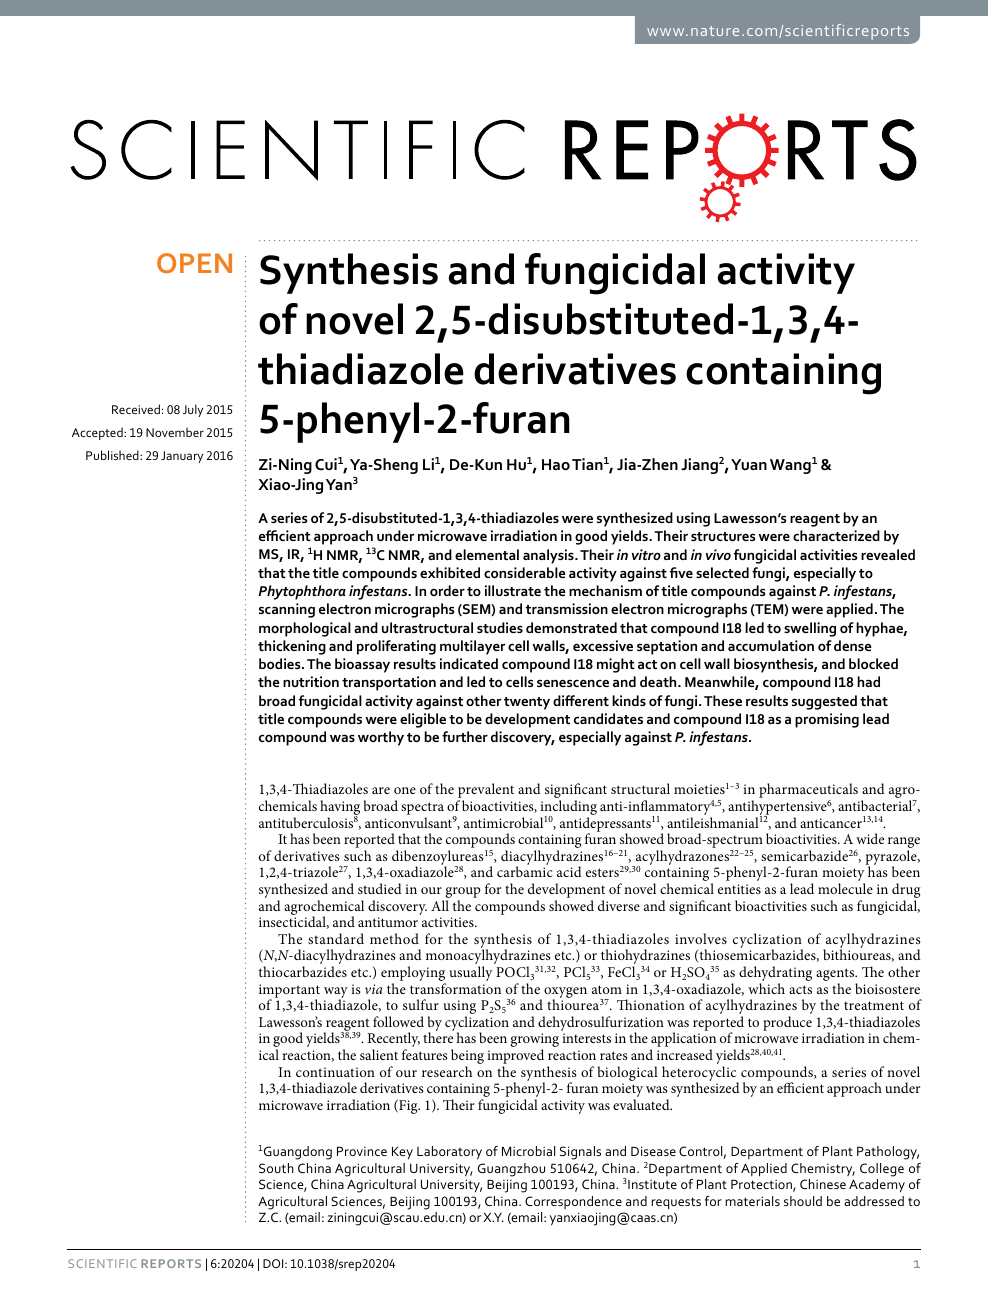 Synthesis And Fungicidal Activity Of Novel 2 5 Disubstituted 1 3 4 Thiadiazole Derivatives Containing 5 Phenyl 2 Furan Topic Of Research Paper In Chemical Sciences Download Scholarly Article Pdf And Read For Free On Cyberleninka Open Science Hub